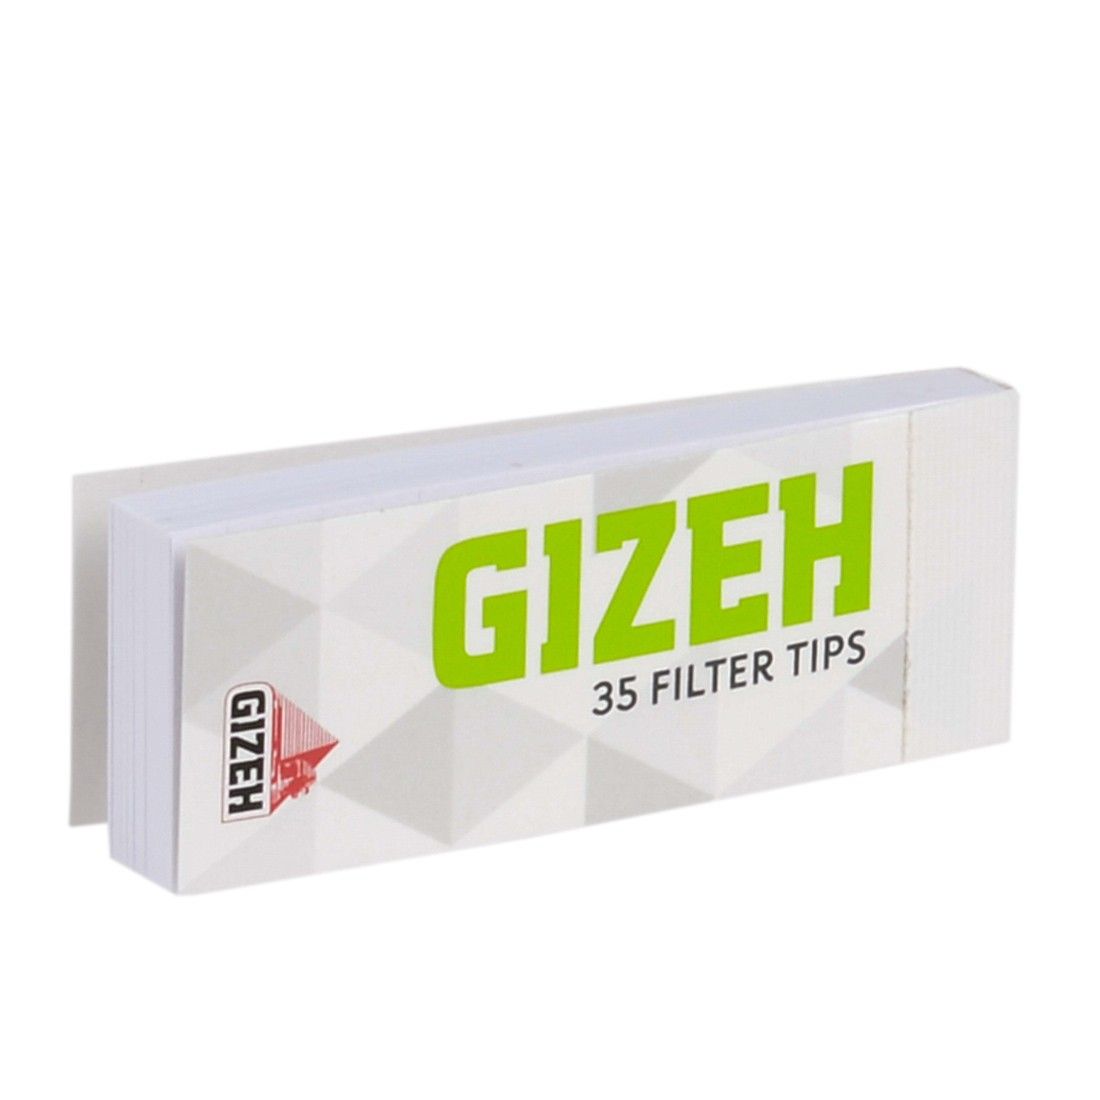 Gizeh Filter Tips - 35 – HERBBOX India